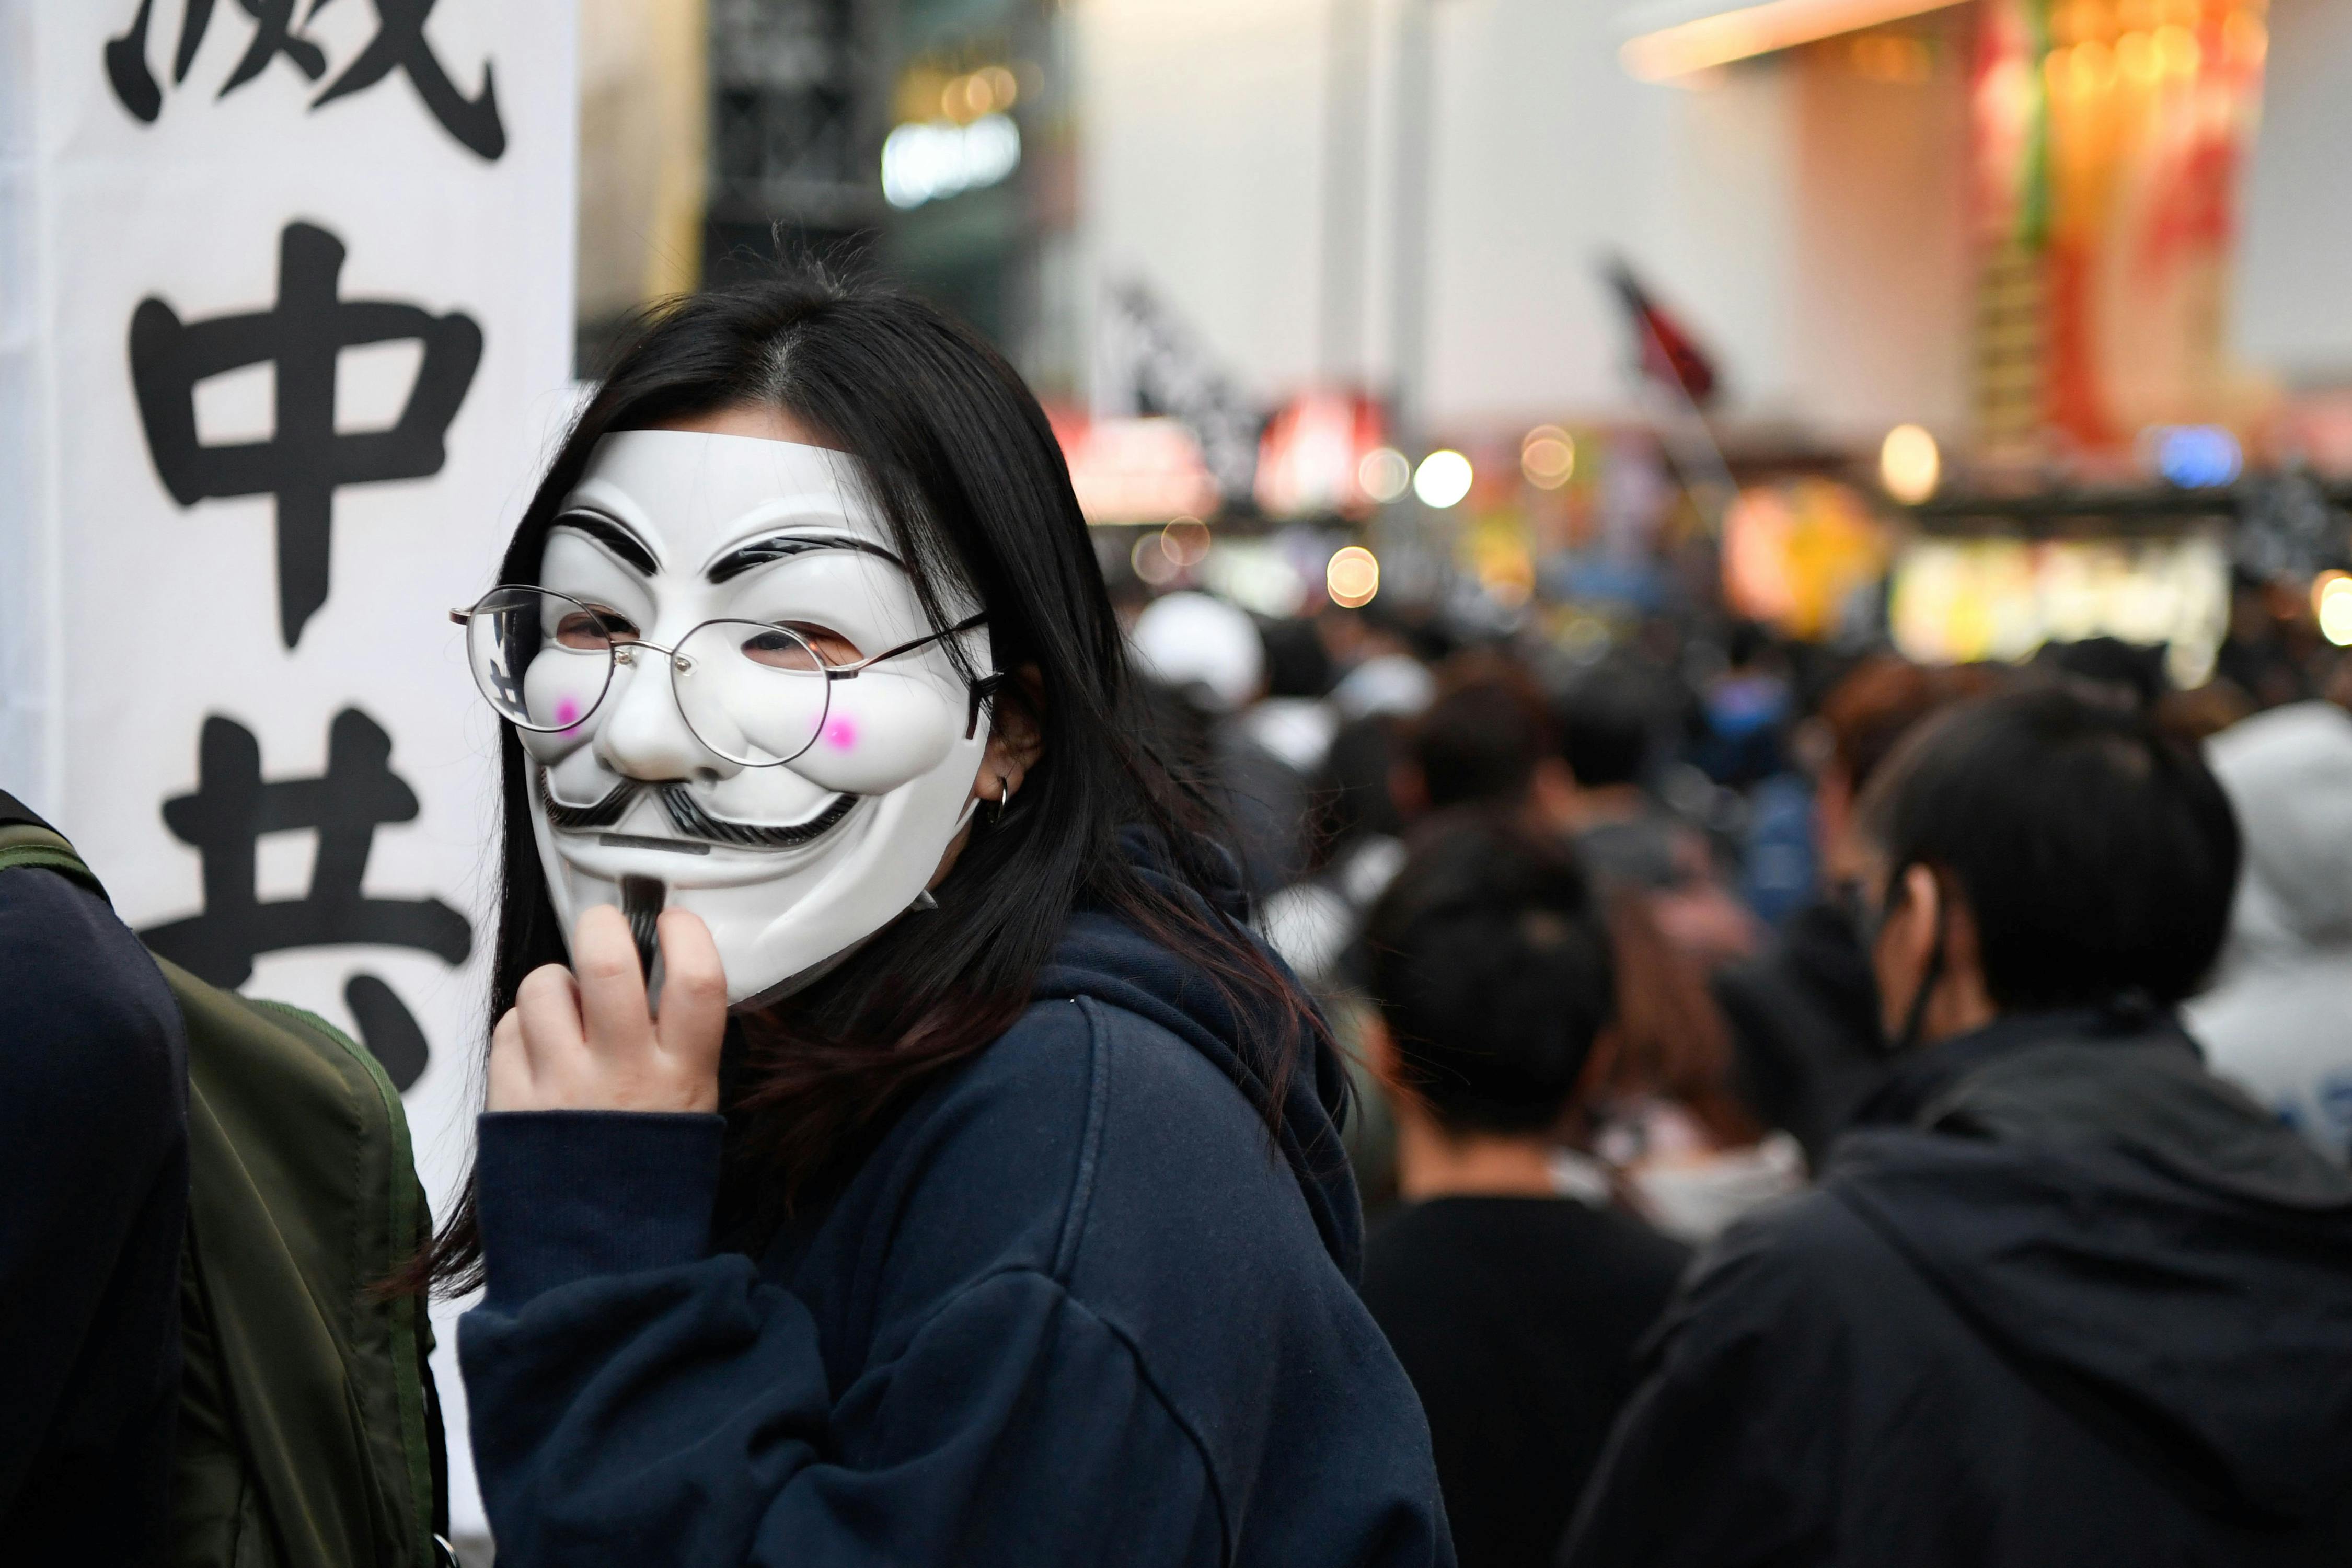 A protester wears a Guy Fawkes mask at a Human Rights Day march in the district of Causeway Bay in Hong Kong, China December 8, 2019. REUTERS/Laurel Chor